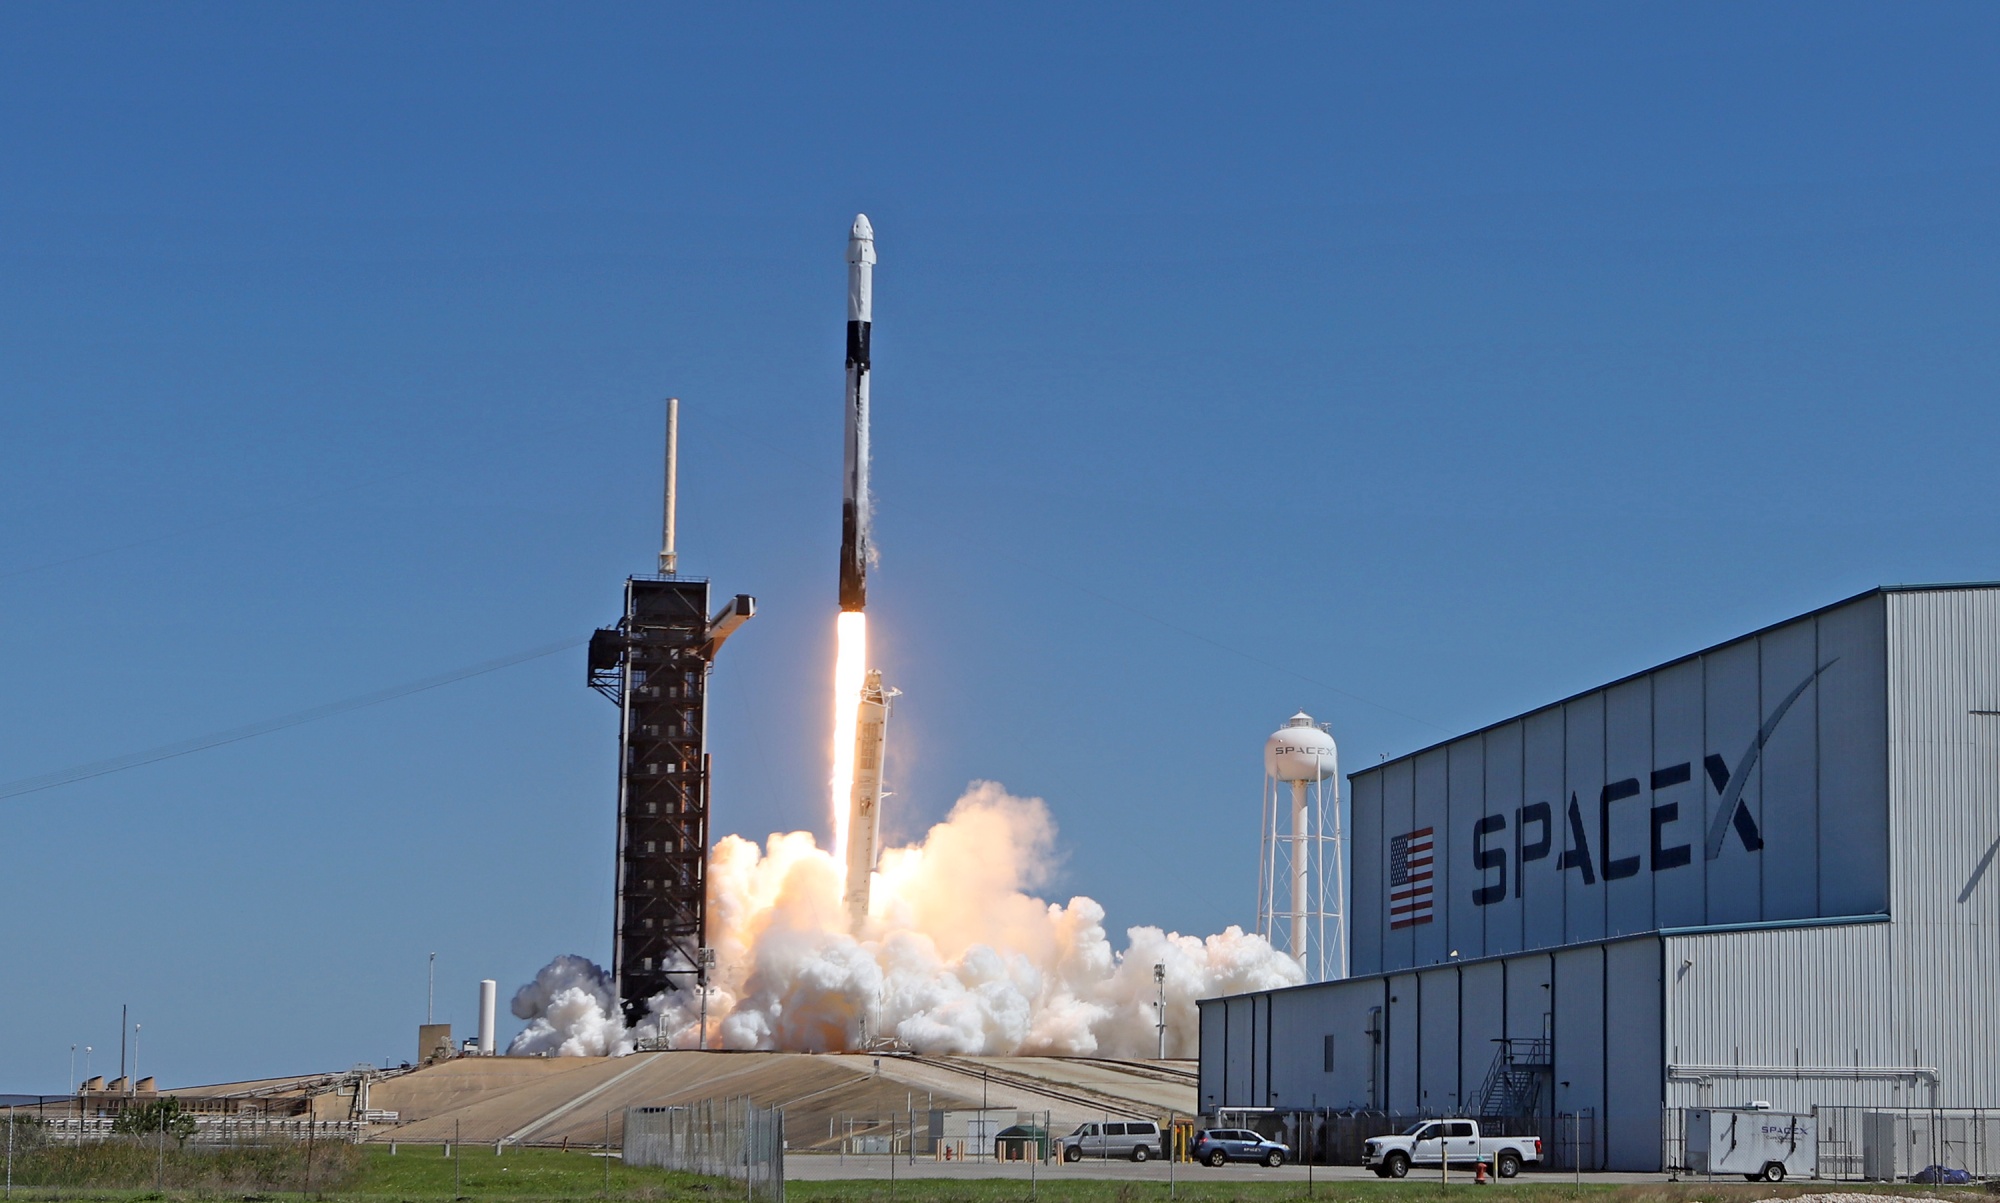 SpaceX dominates the market for commercial space launch services with its Falcon rockets.